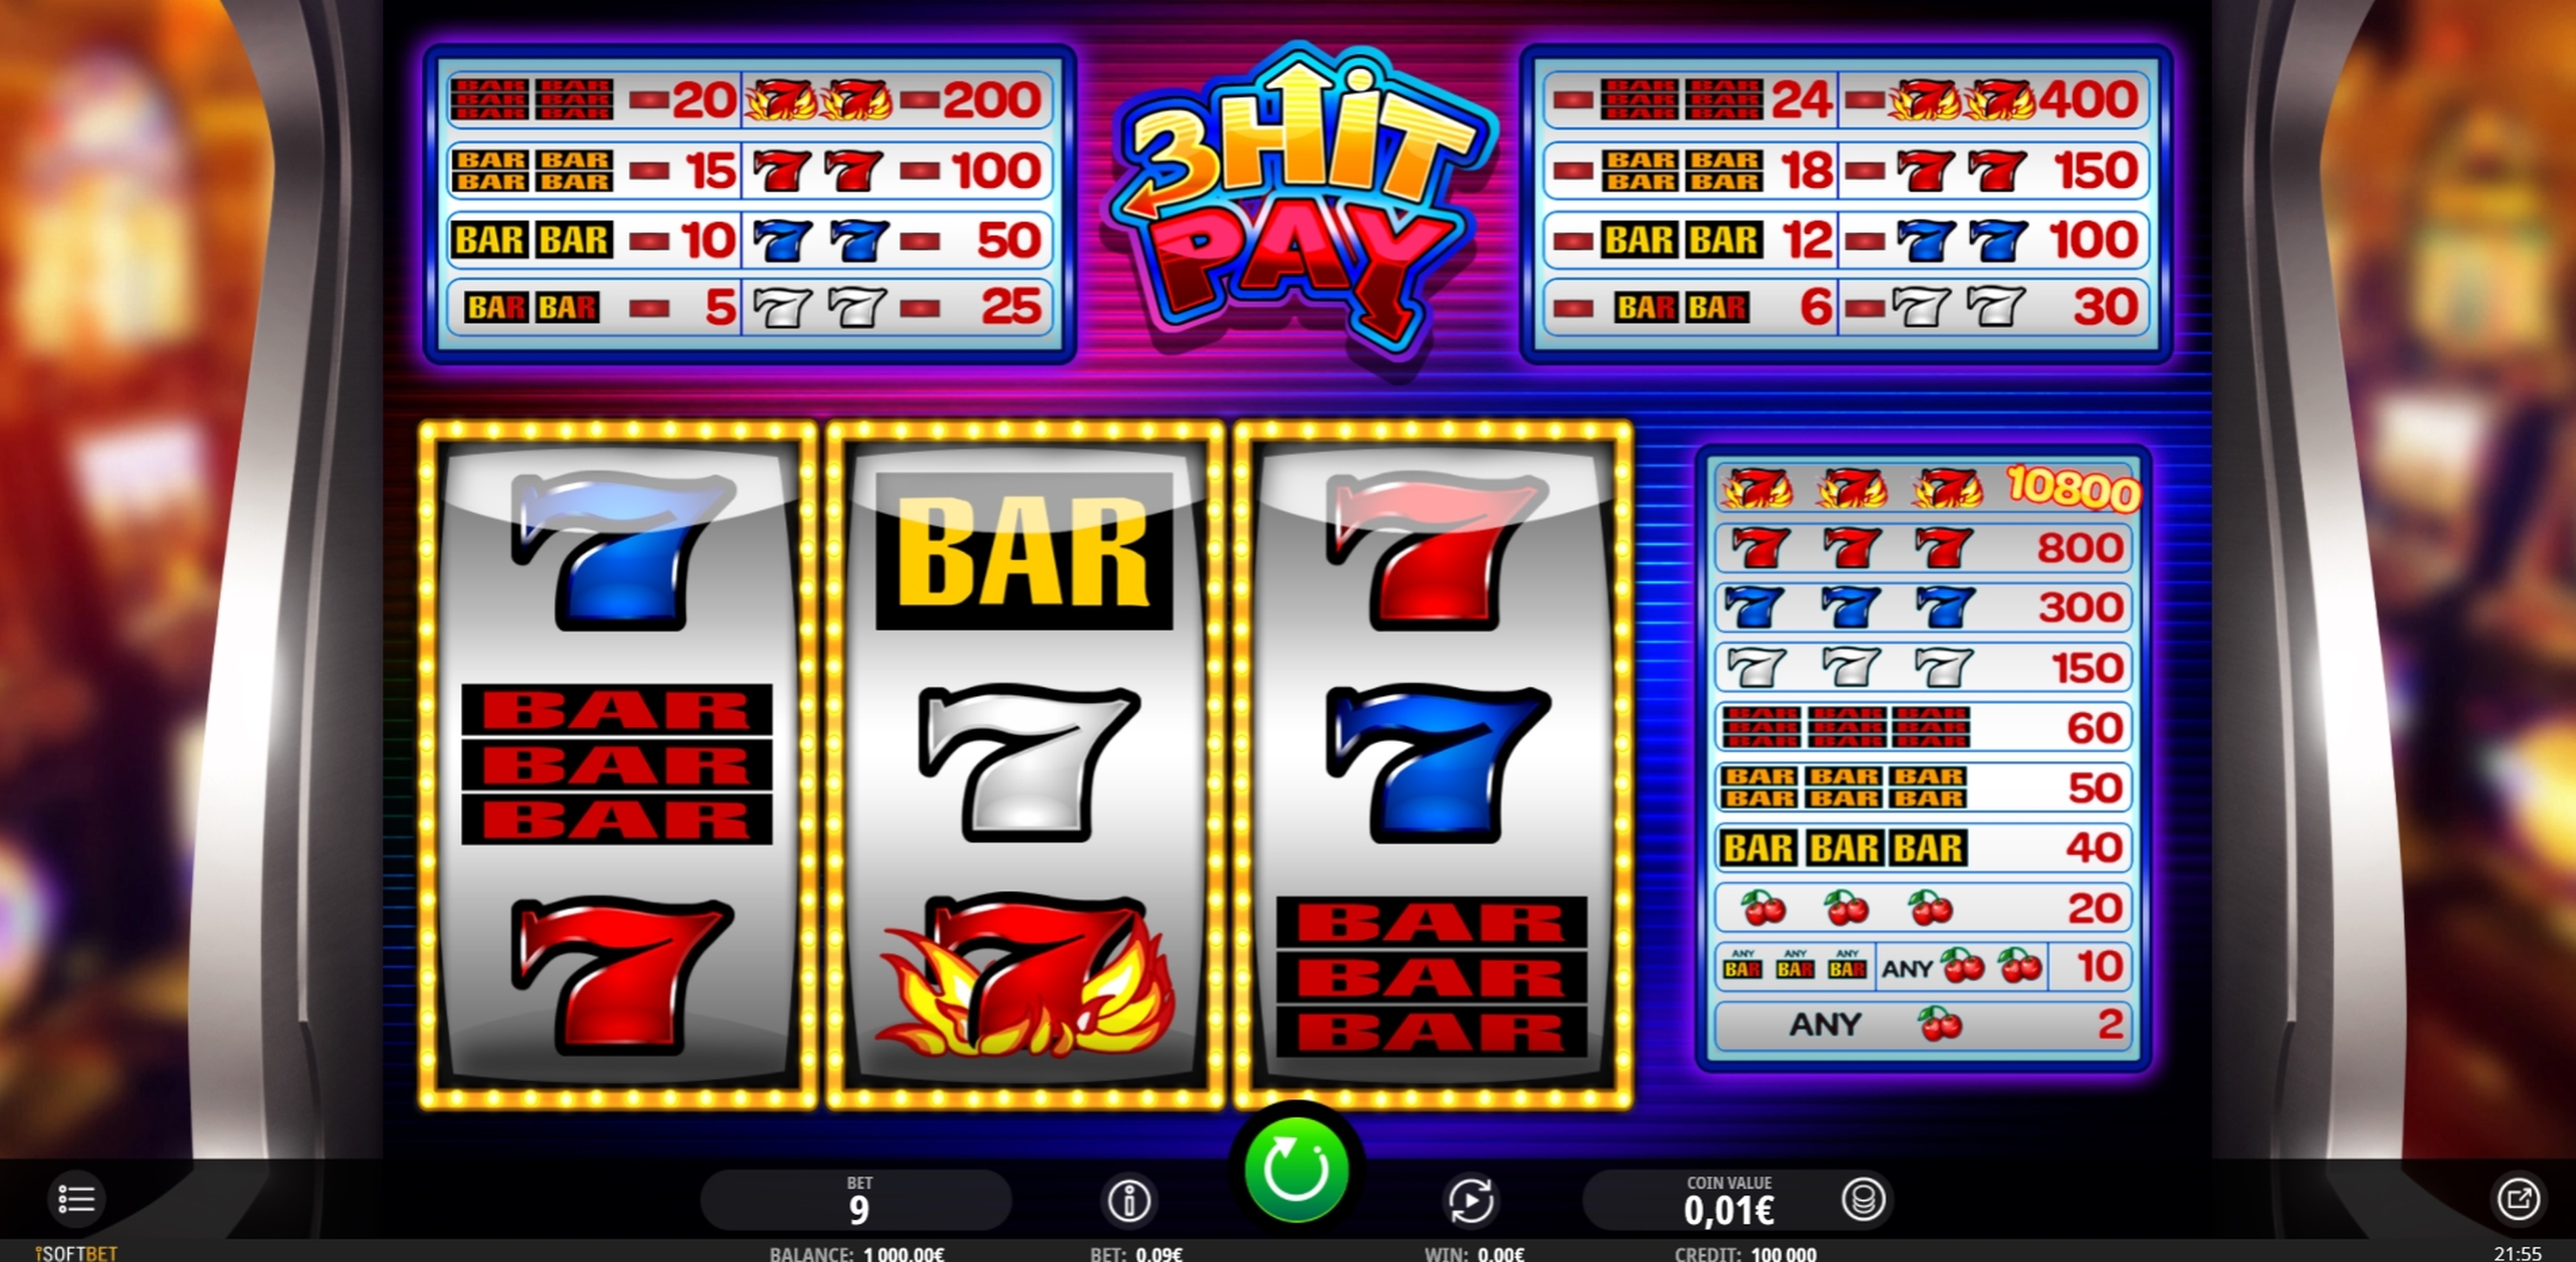 Reels in 3 Hit Pay Slot Game by iSoftBet